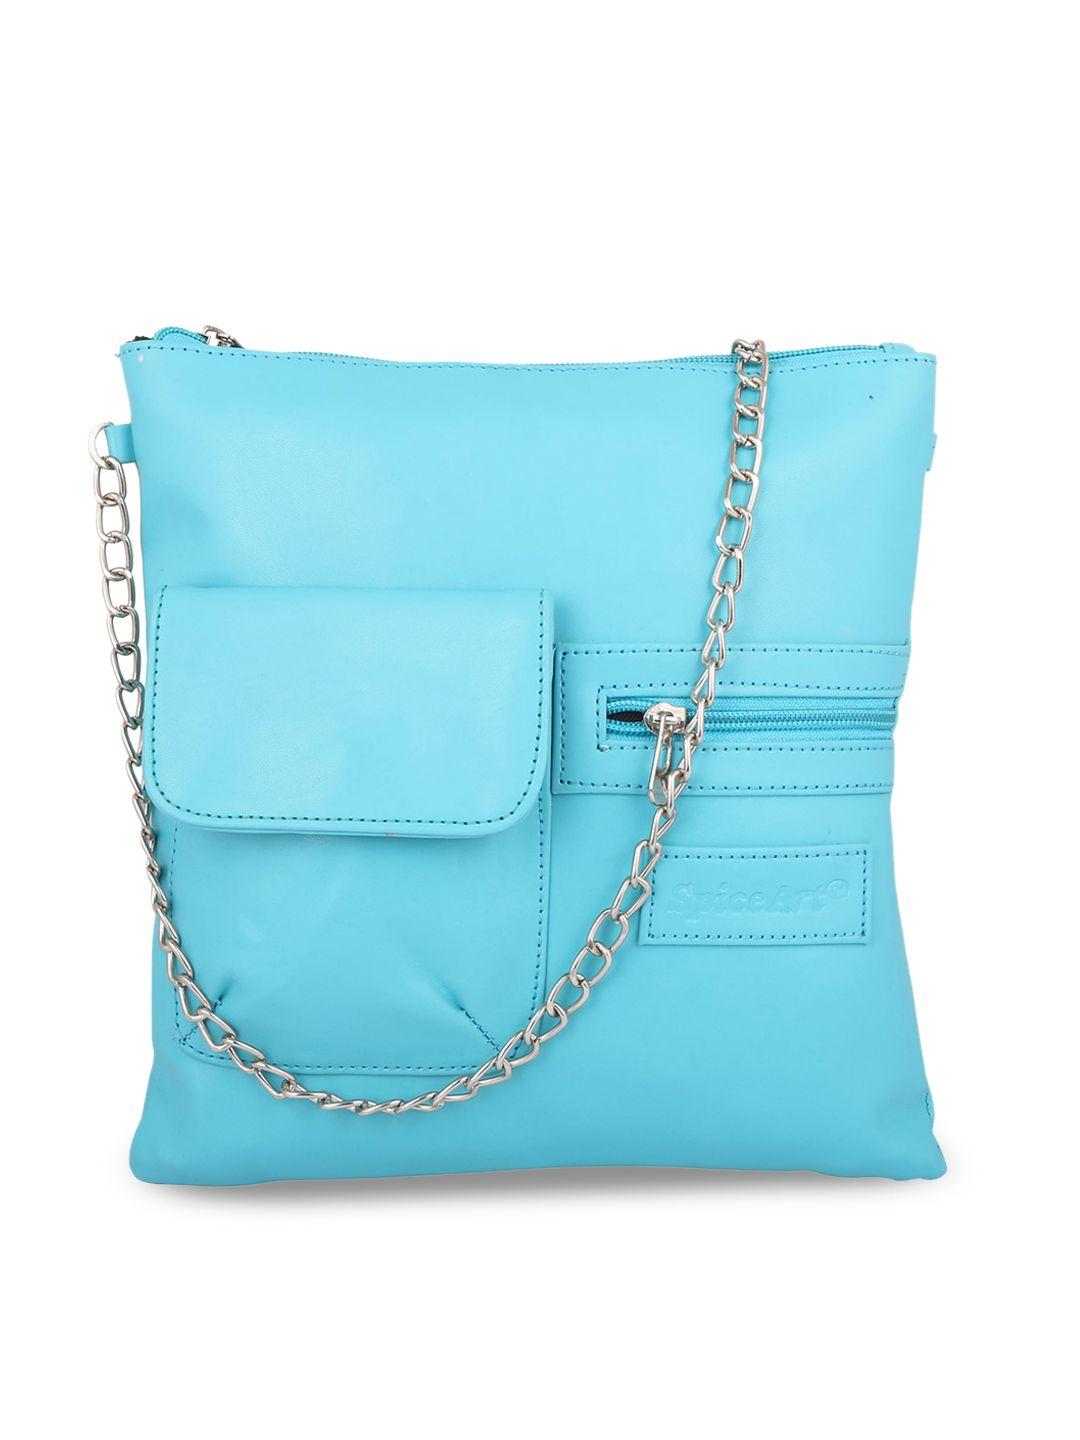 spice art turquoise blue pu structured sling bag